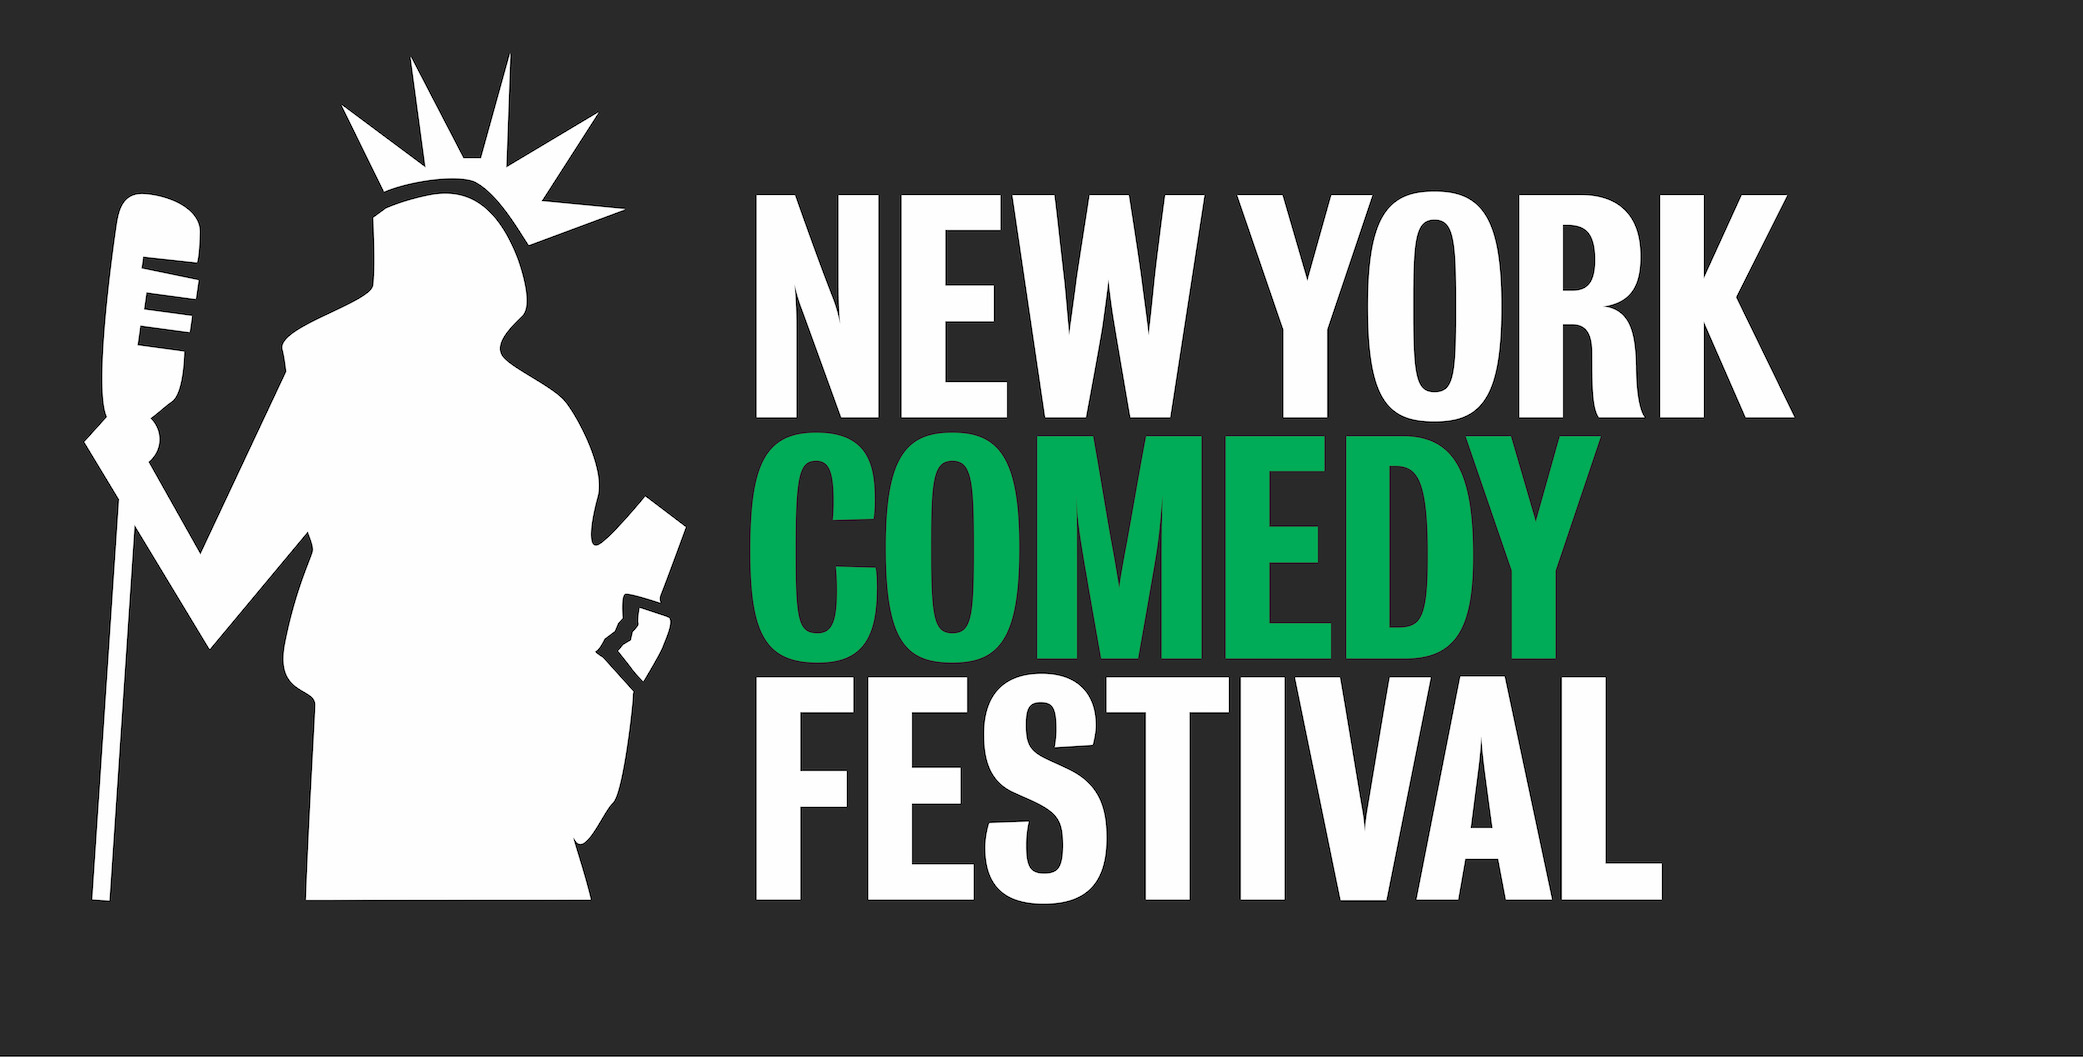 Here are your headliners for the 2019 New York Comedy Festival